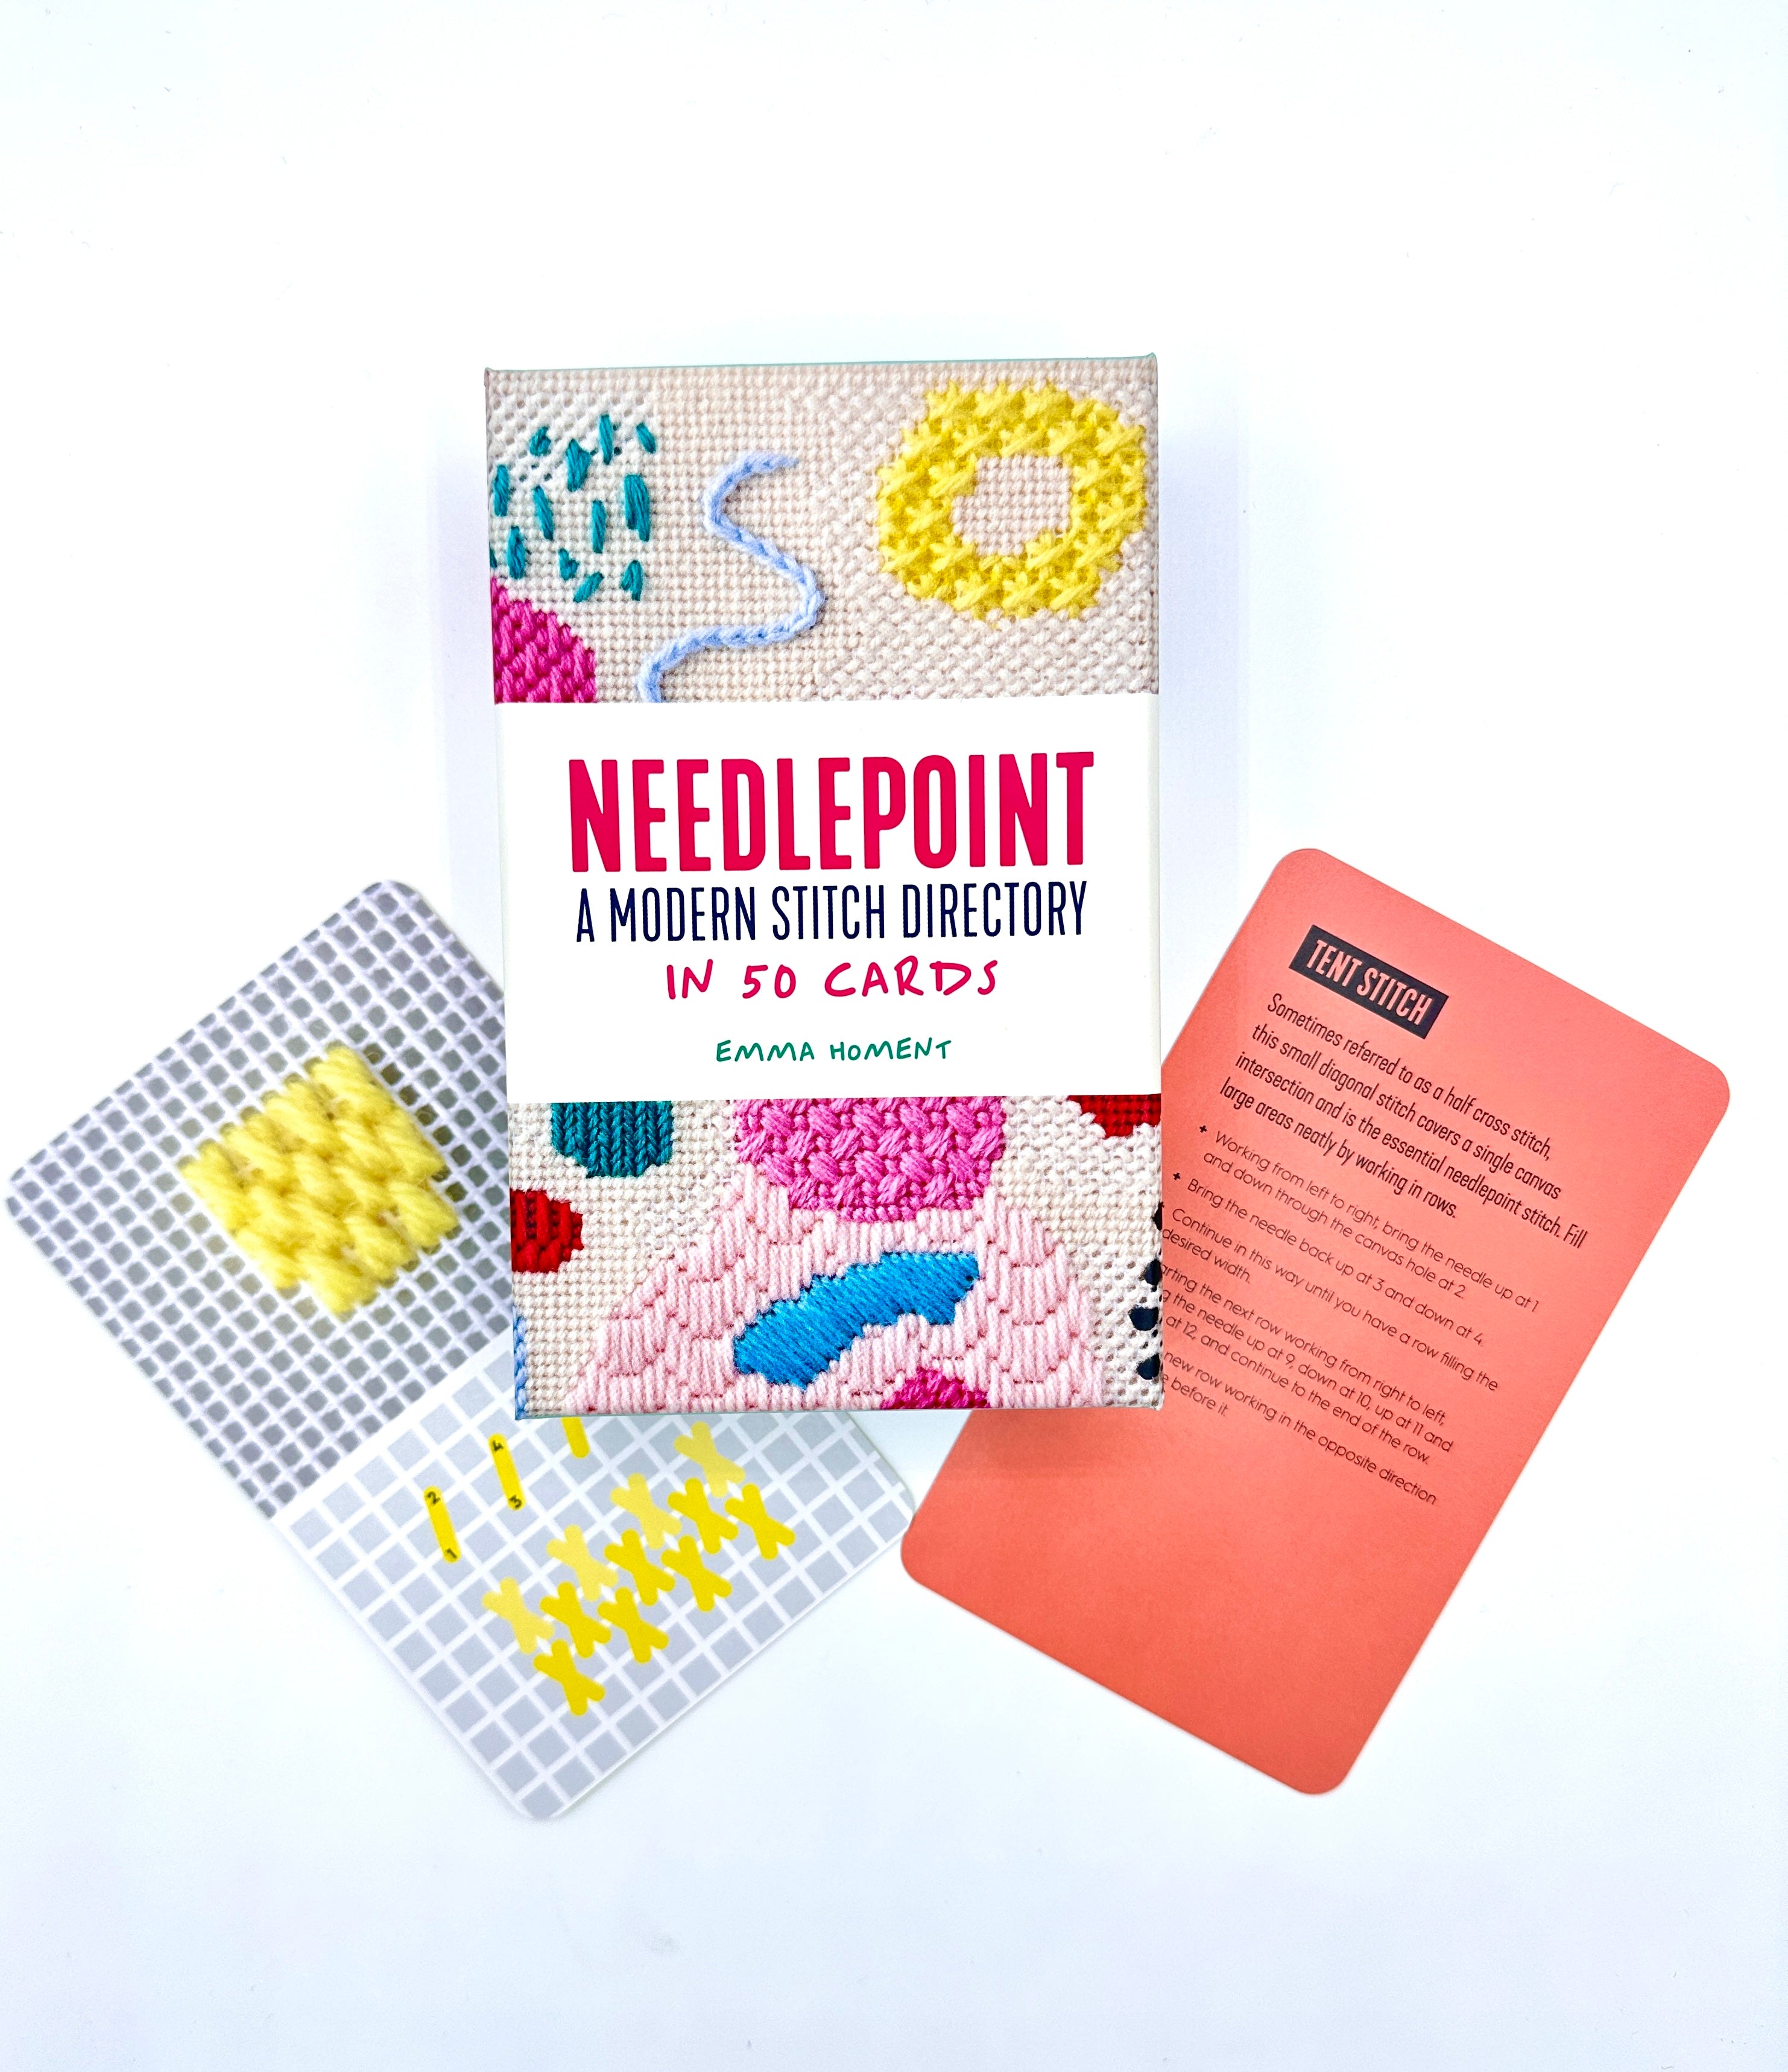 Needlepoint: A modern stitch directory in 50 cards - David and Charles